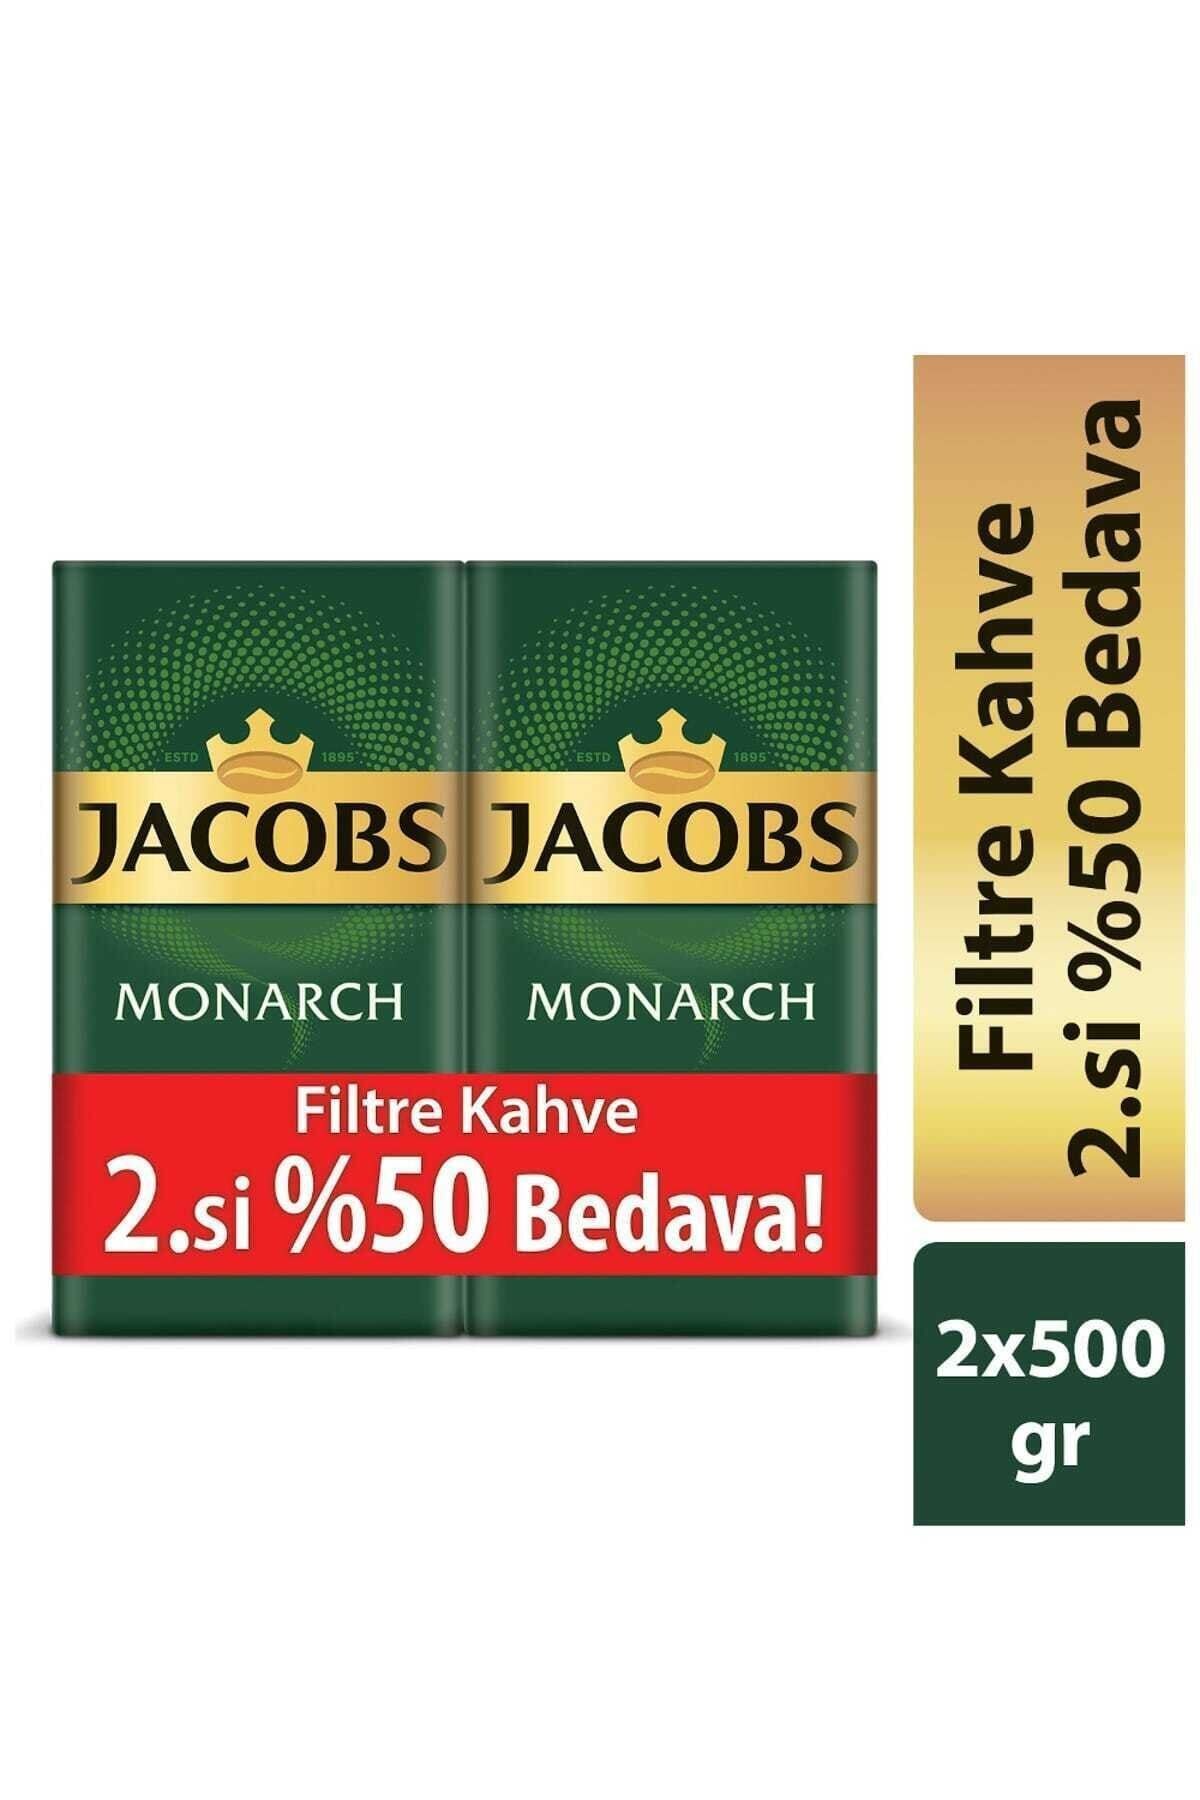 Jacobs Monarch Filtre Kahve 500 gr X 2 Adet (THERMO CUP HEDİYELİ)